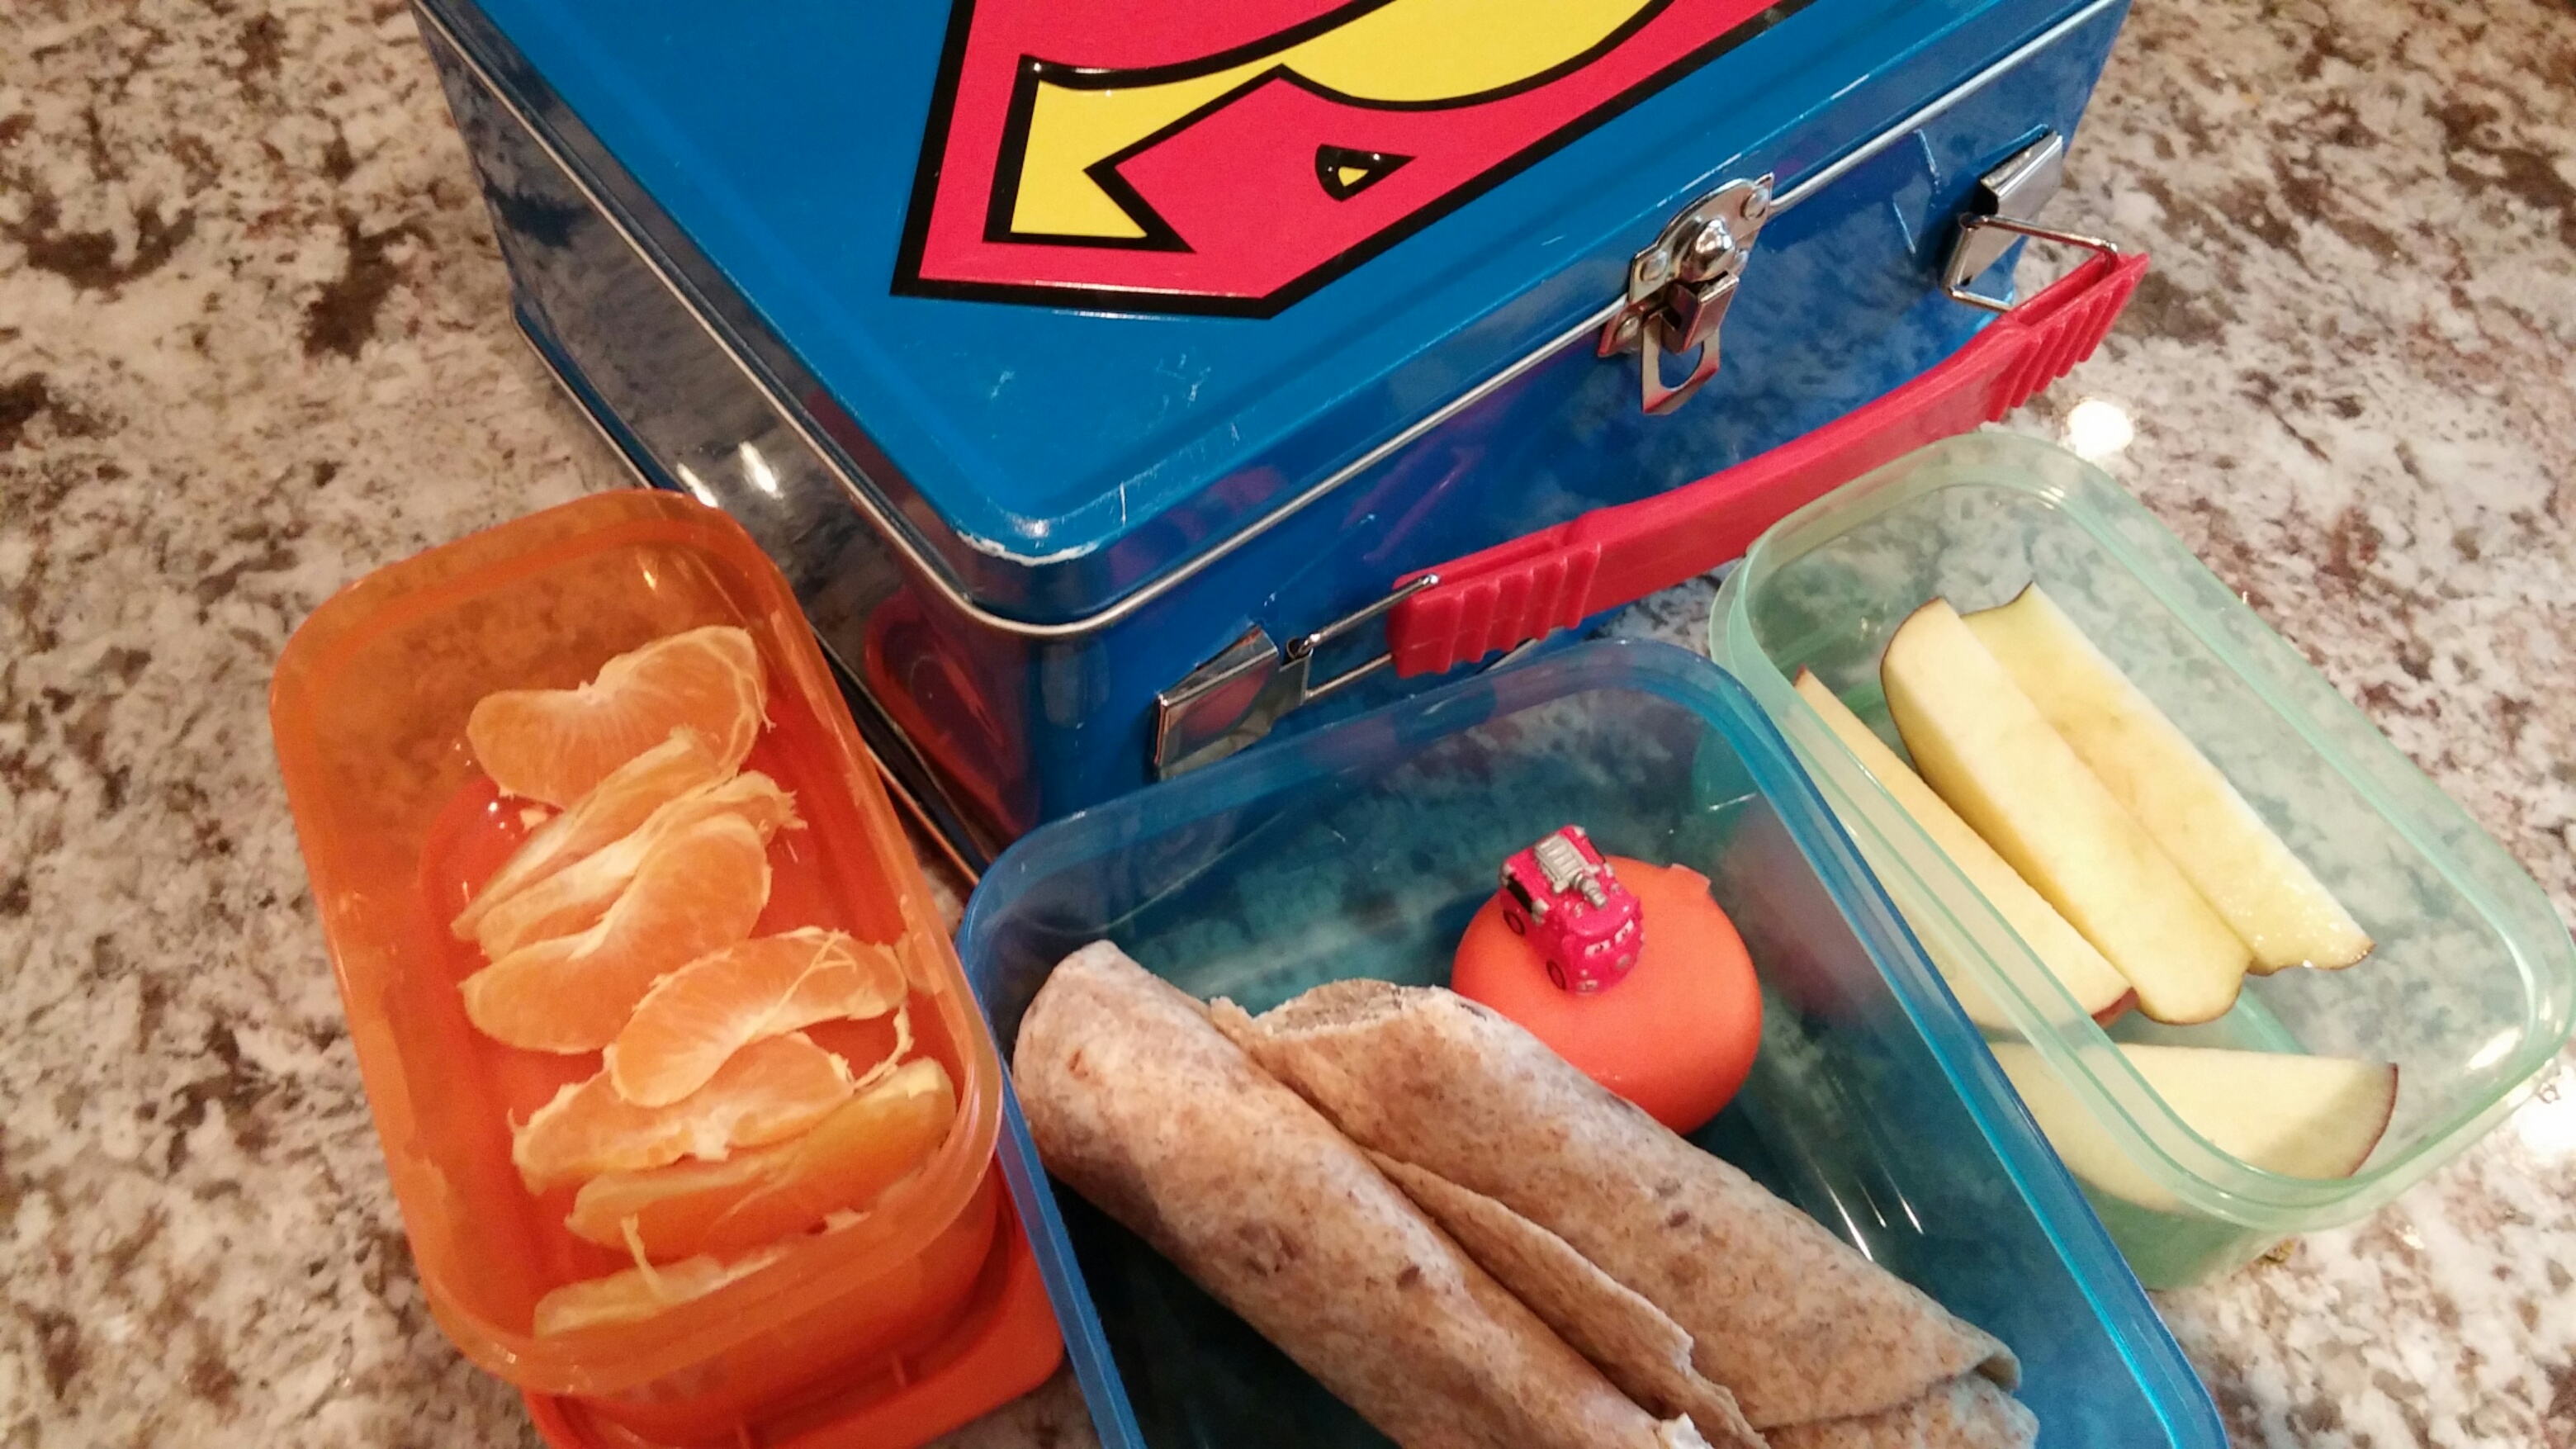 Rubbermaid LunchBlox Kids Modular Containers Review and Giveaway